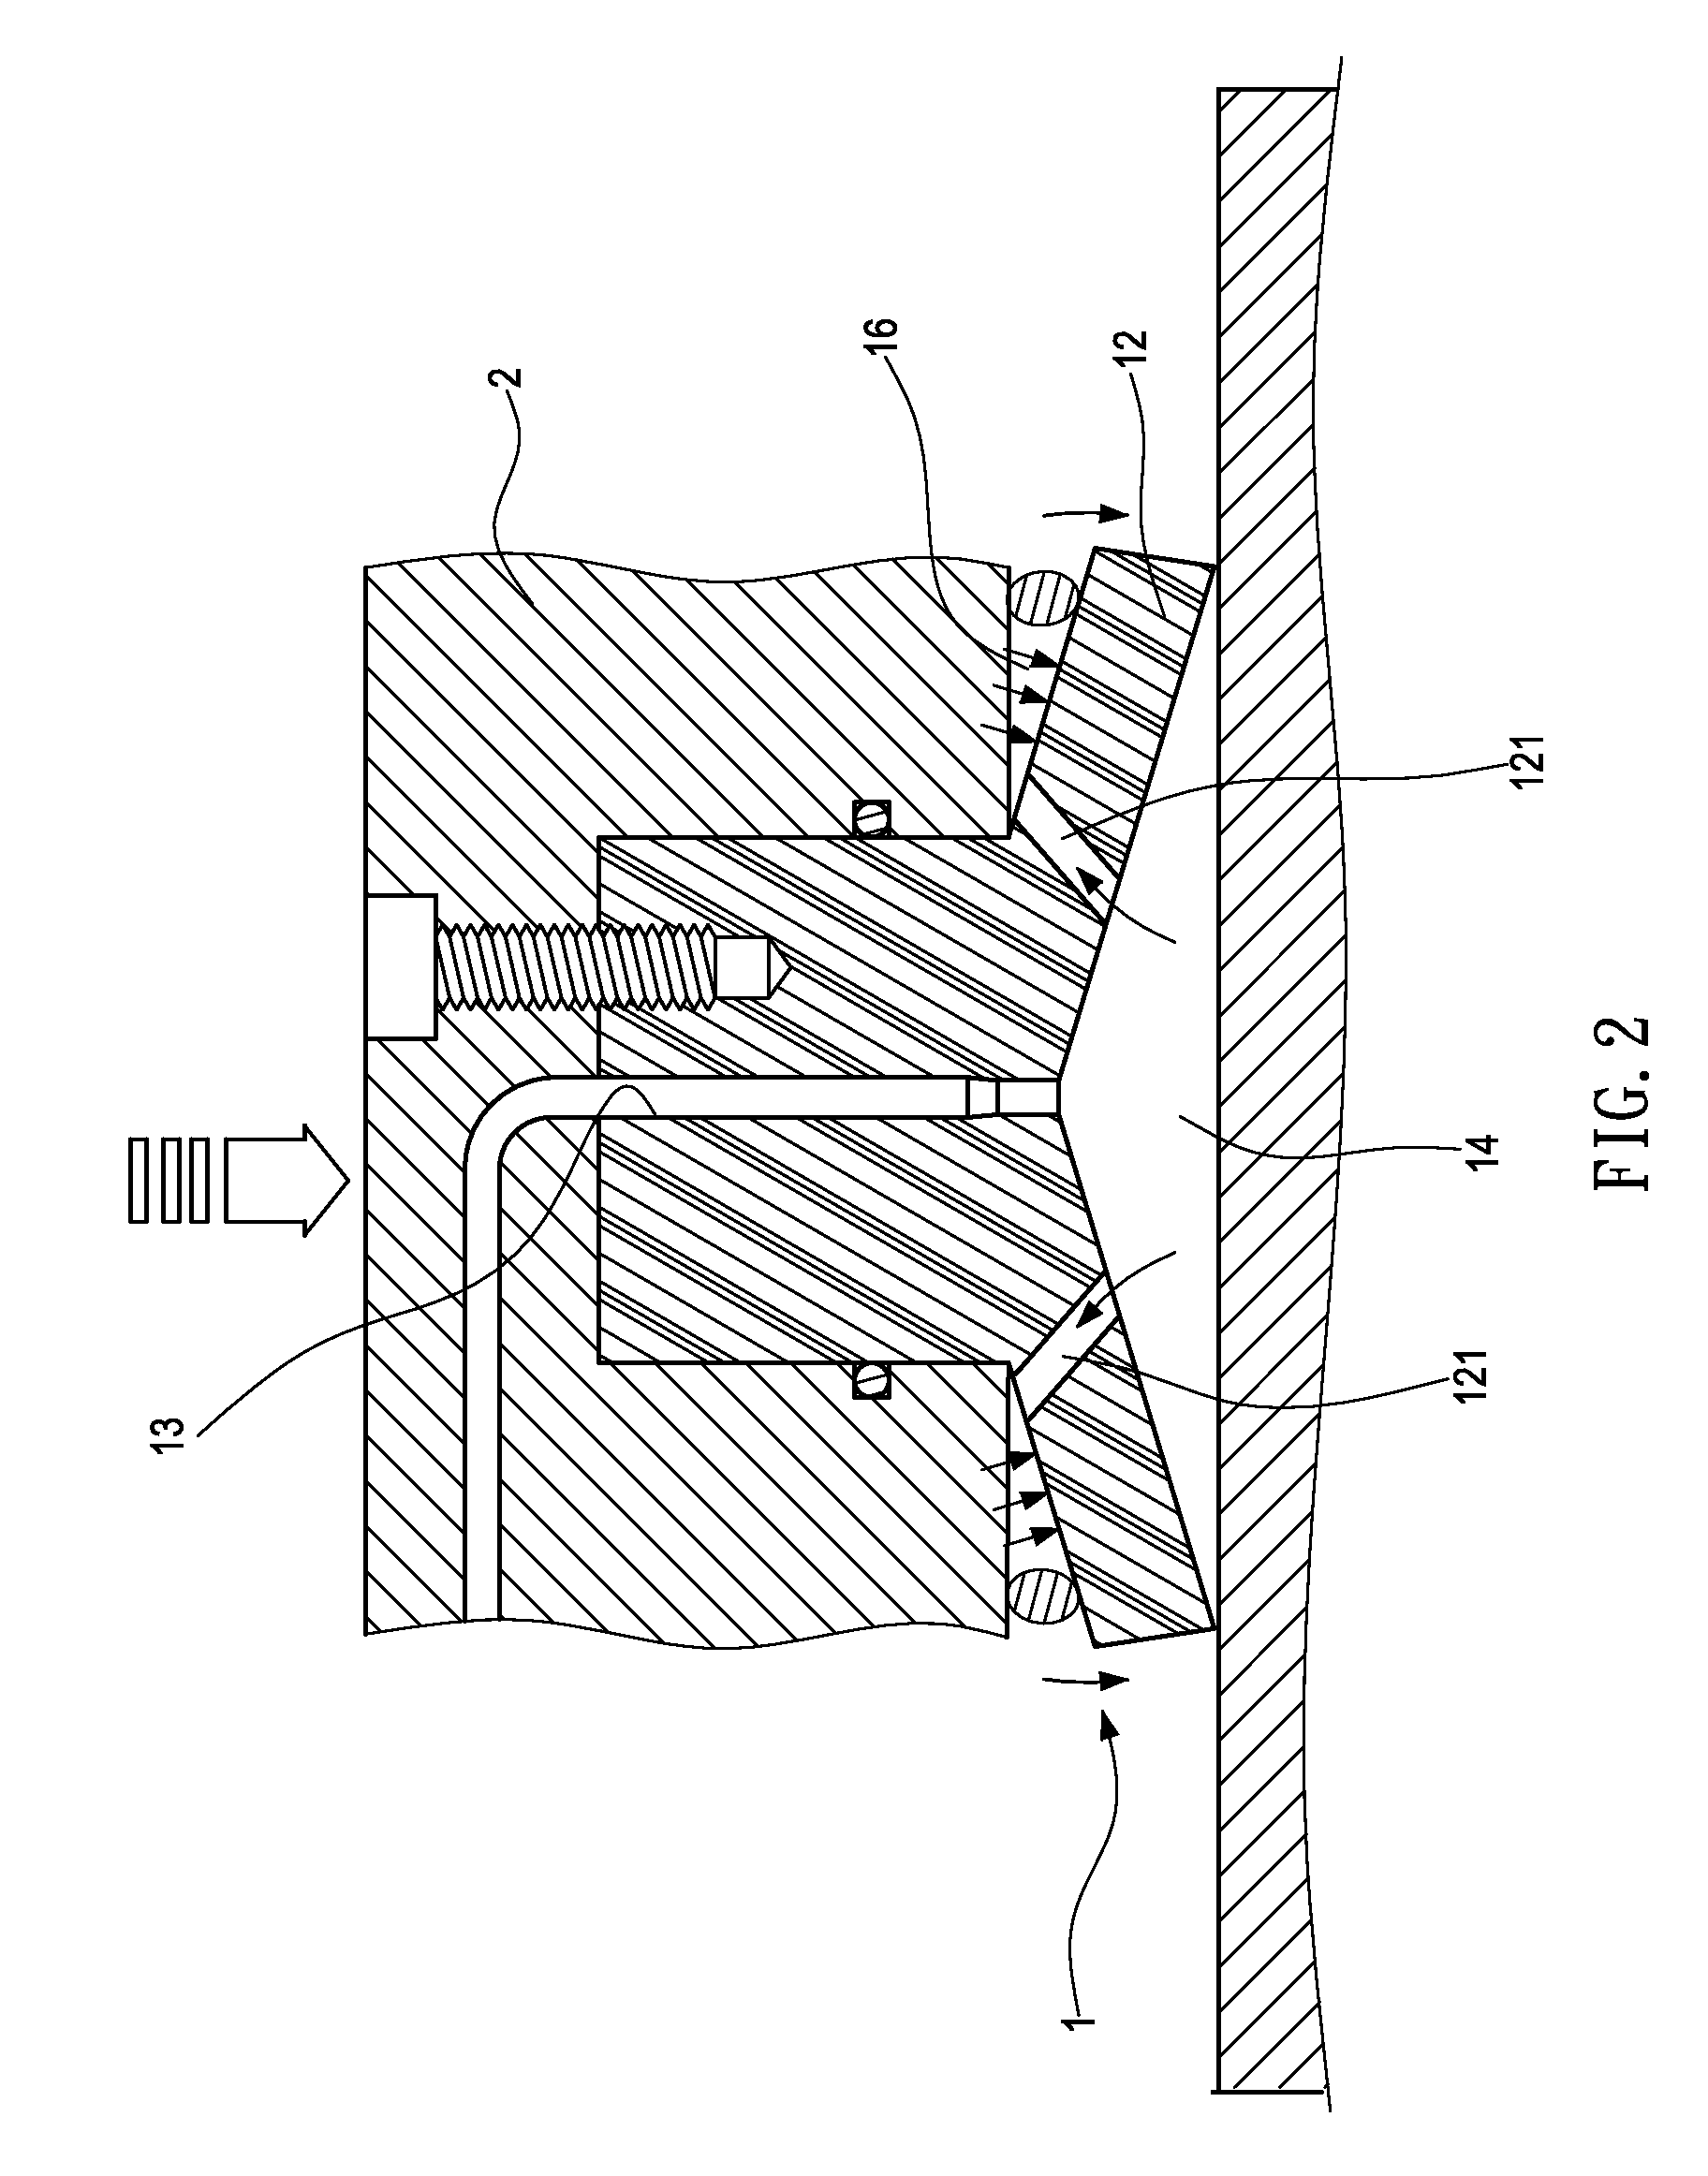 Self-compensating hydrostatic planar bearing device and method thereof